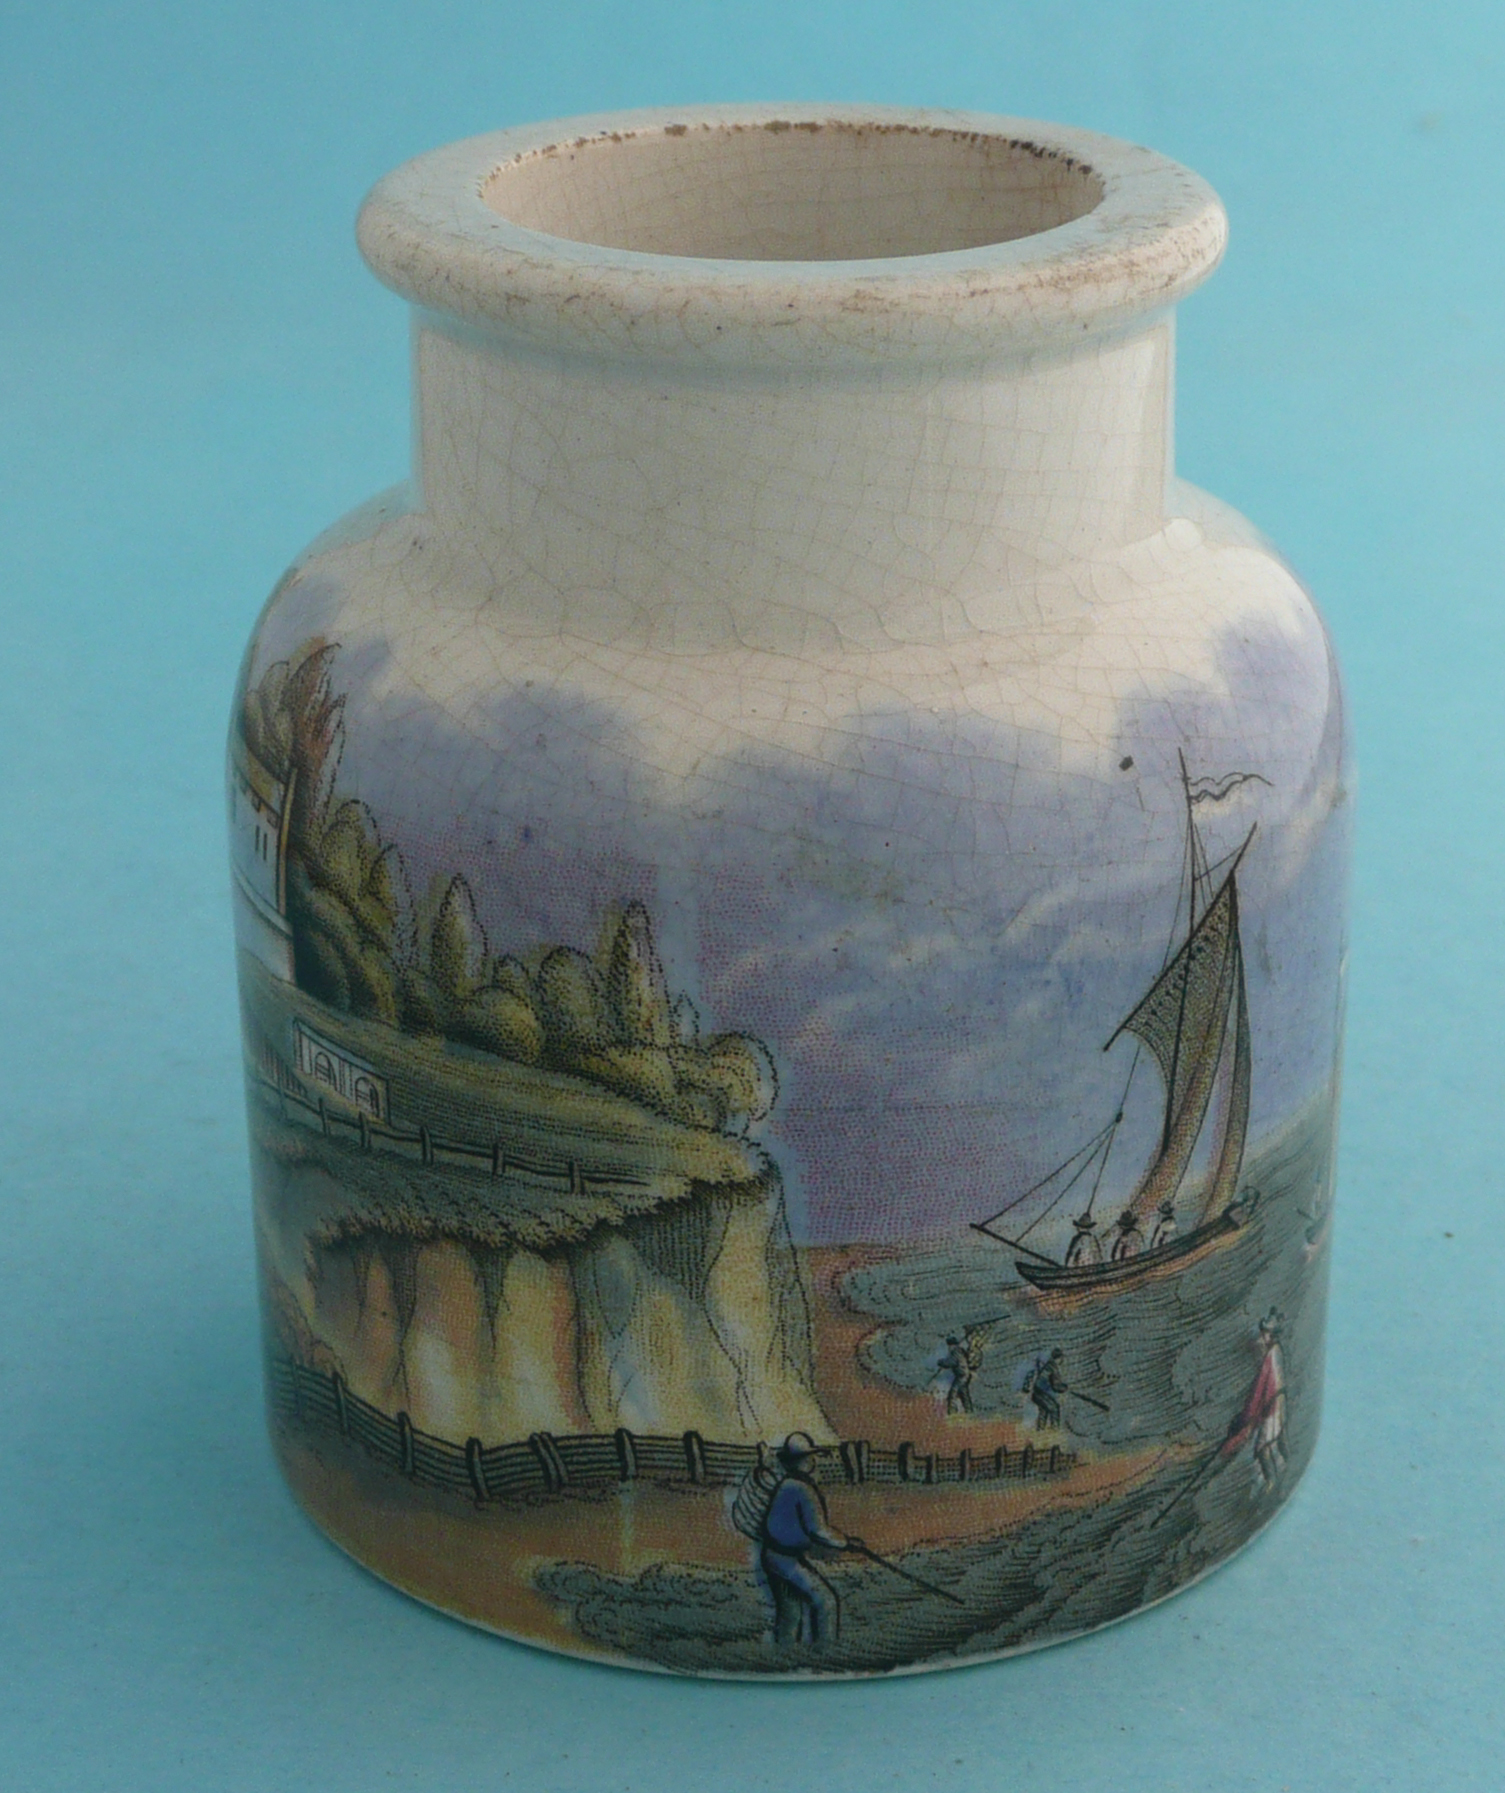 Meat Paste Jars: Pegwell Bay and Cliffs (67)